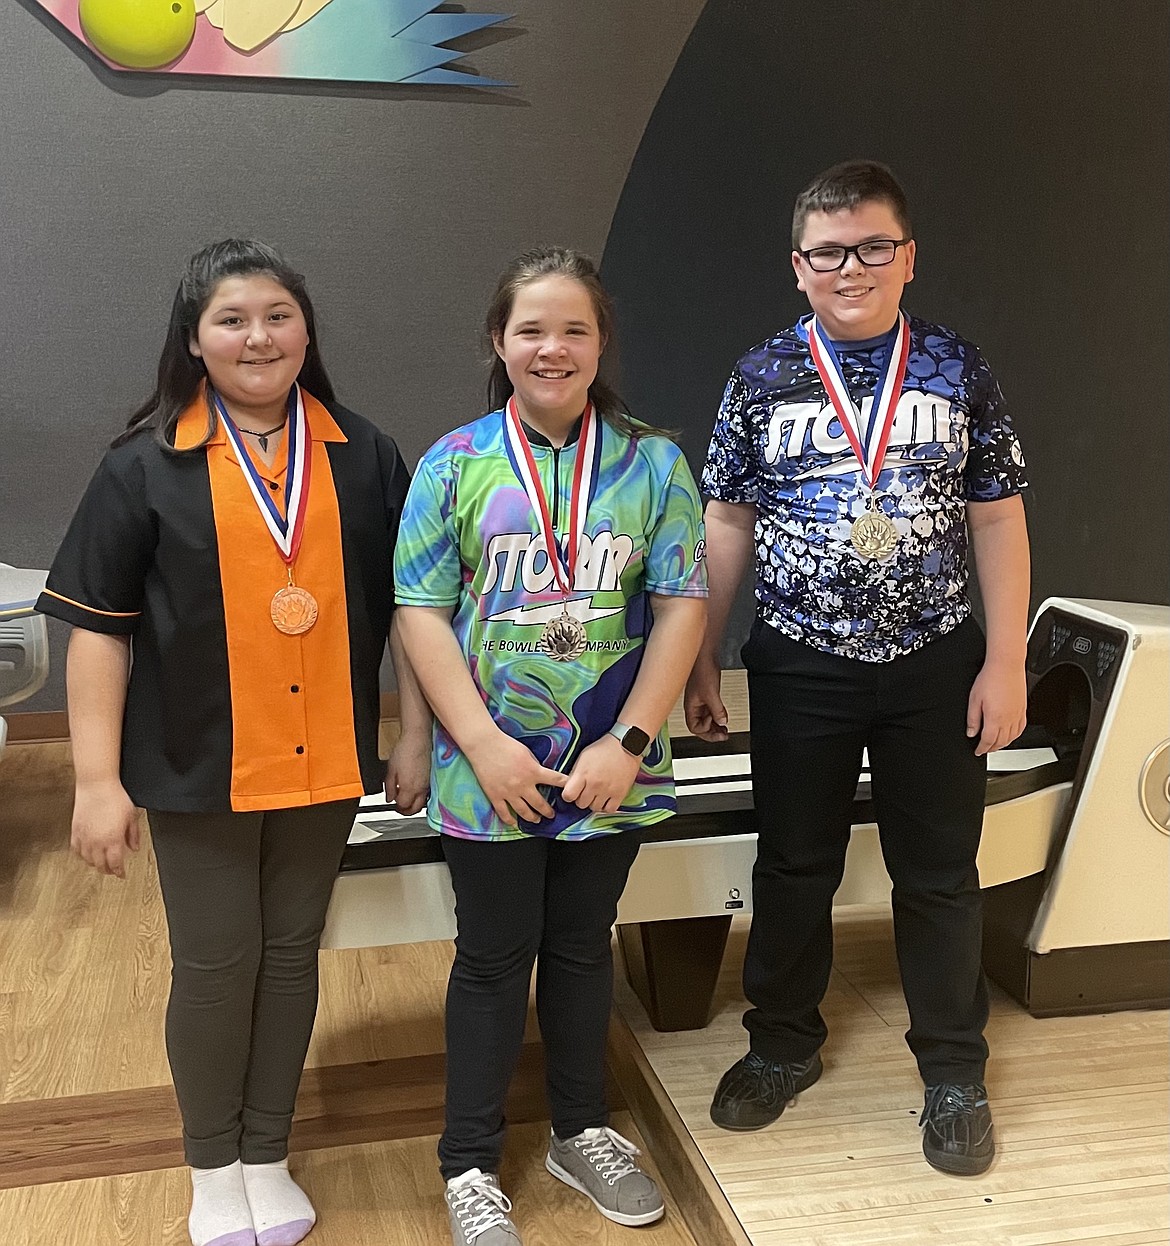 Courtesy photo
An Idaho Junior Bowlers Tour event was held Sunday at Sunset Bowling Center in Coeur d'Alene. In Division B, the top four placers were, from left, Aubree Lawrence, fourth; Jesyka Sarbercher, second; and Jacob Lewis, first. Not pictured is Colton Keenan, third.